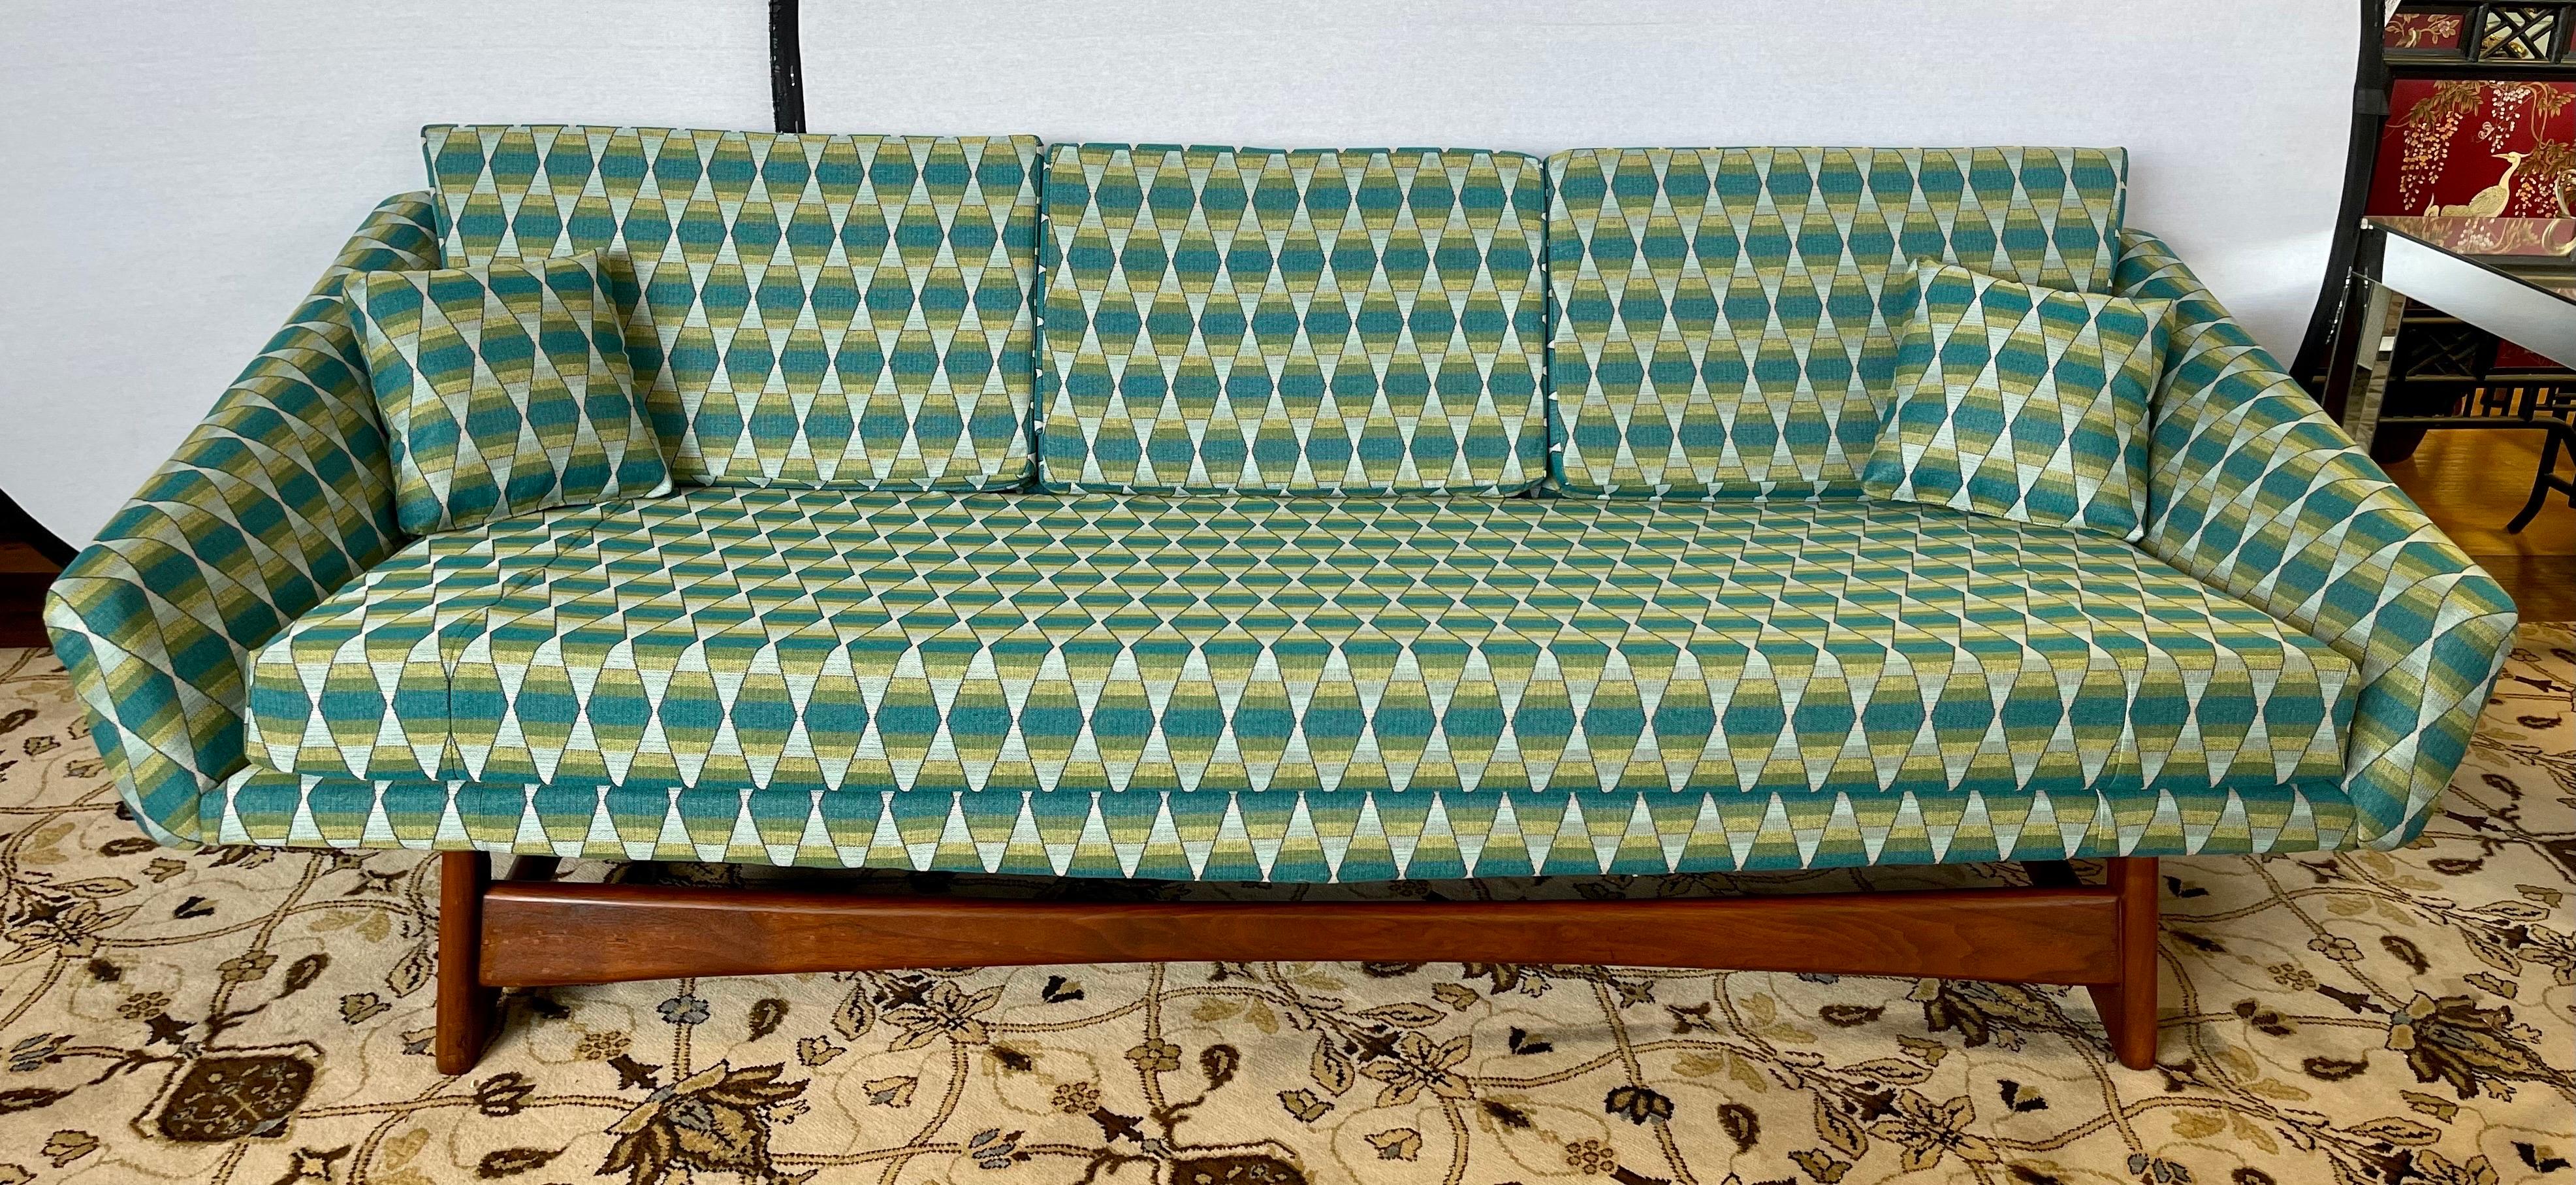 Authentic Adrian Pearsall pieces are some of his most dramatic creations. This one was just reupholstered and re-cushioned with rare Jack Lenor Larsen fabric.
The atomic design on the fabric is drop dead gorgeous with colors of gray, olive green,